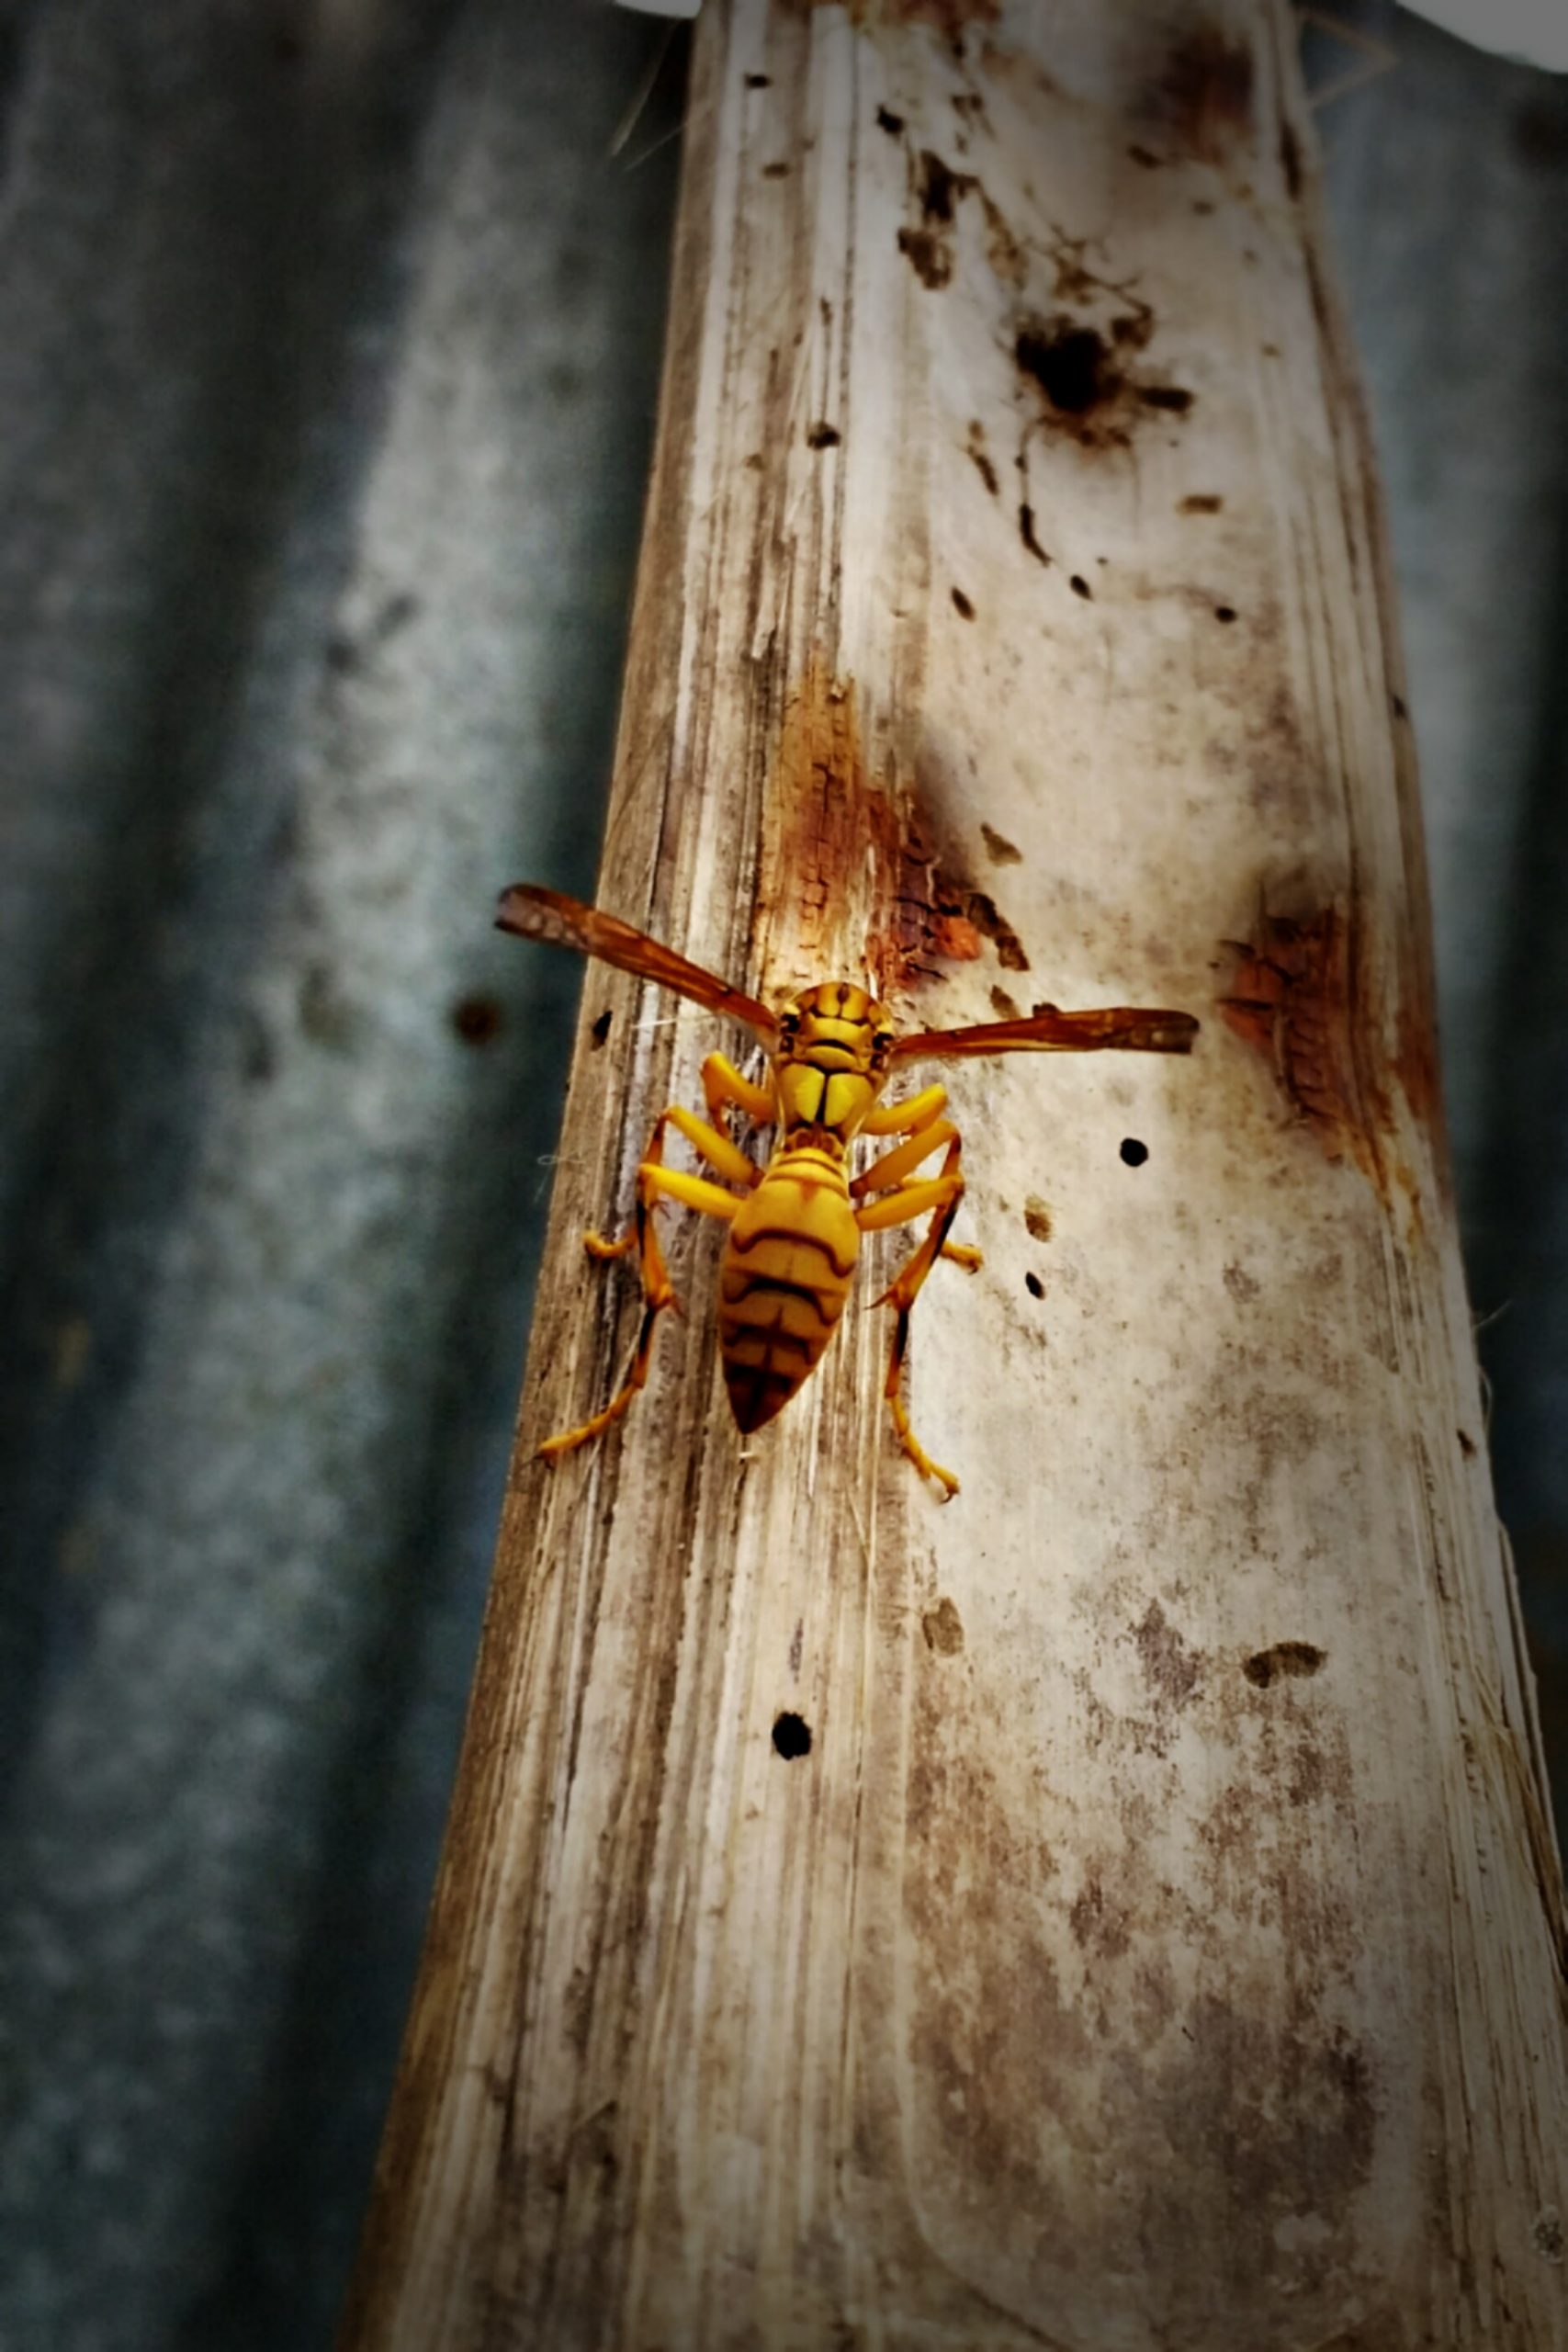 Wasp on a piece of wood